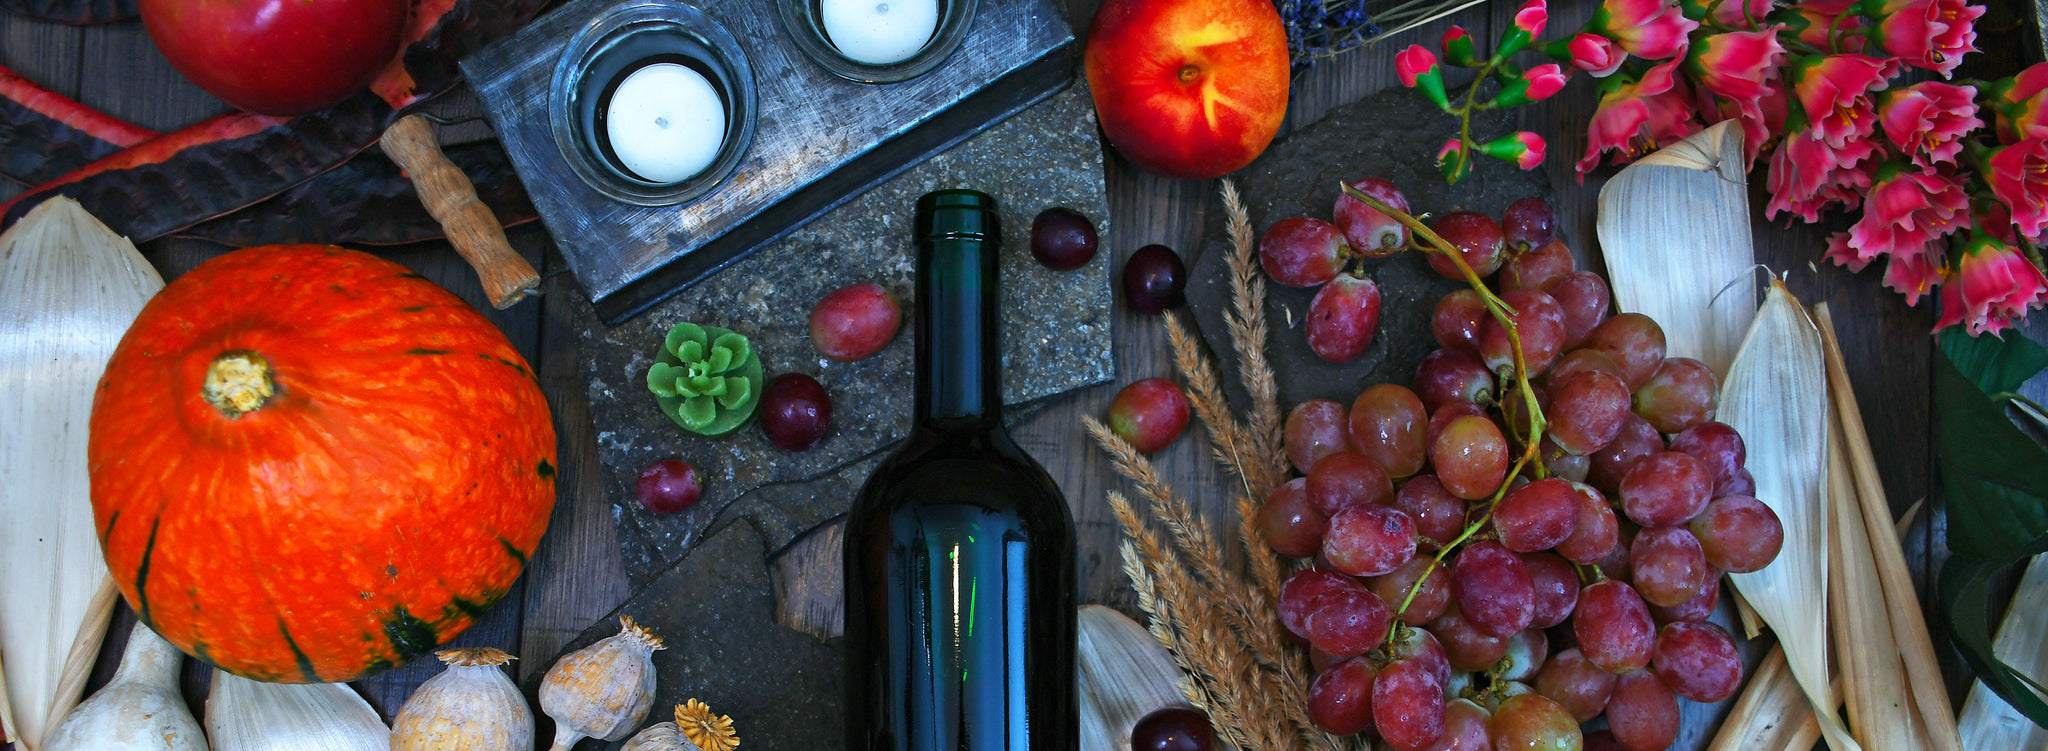 Autumn Season with Grapes Pips and Wine Bottles Poppy